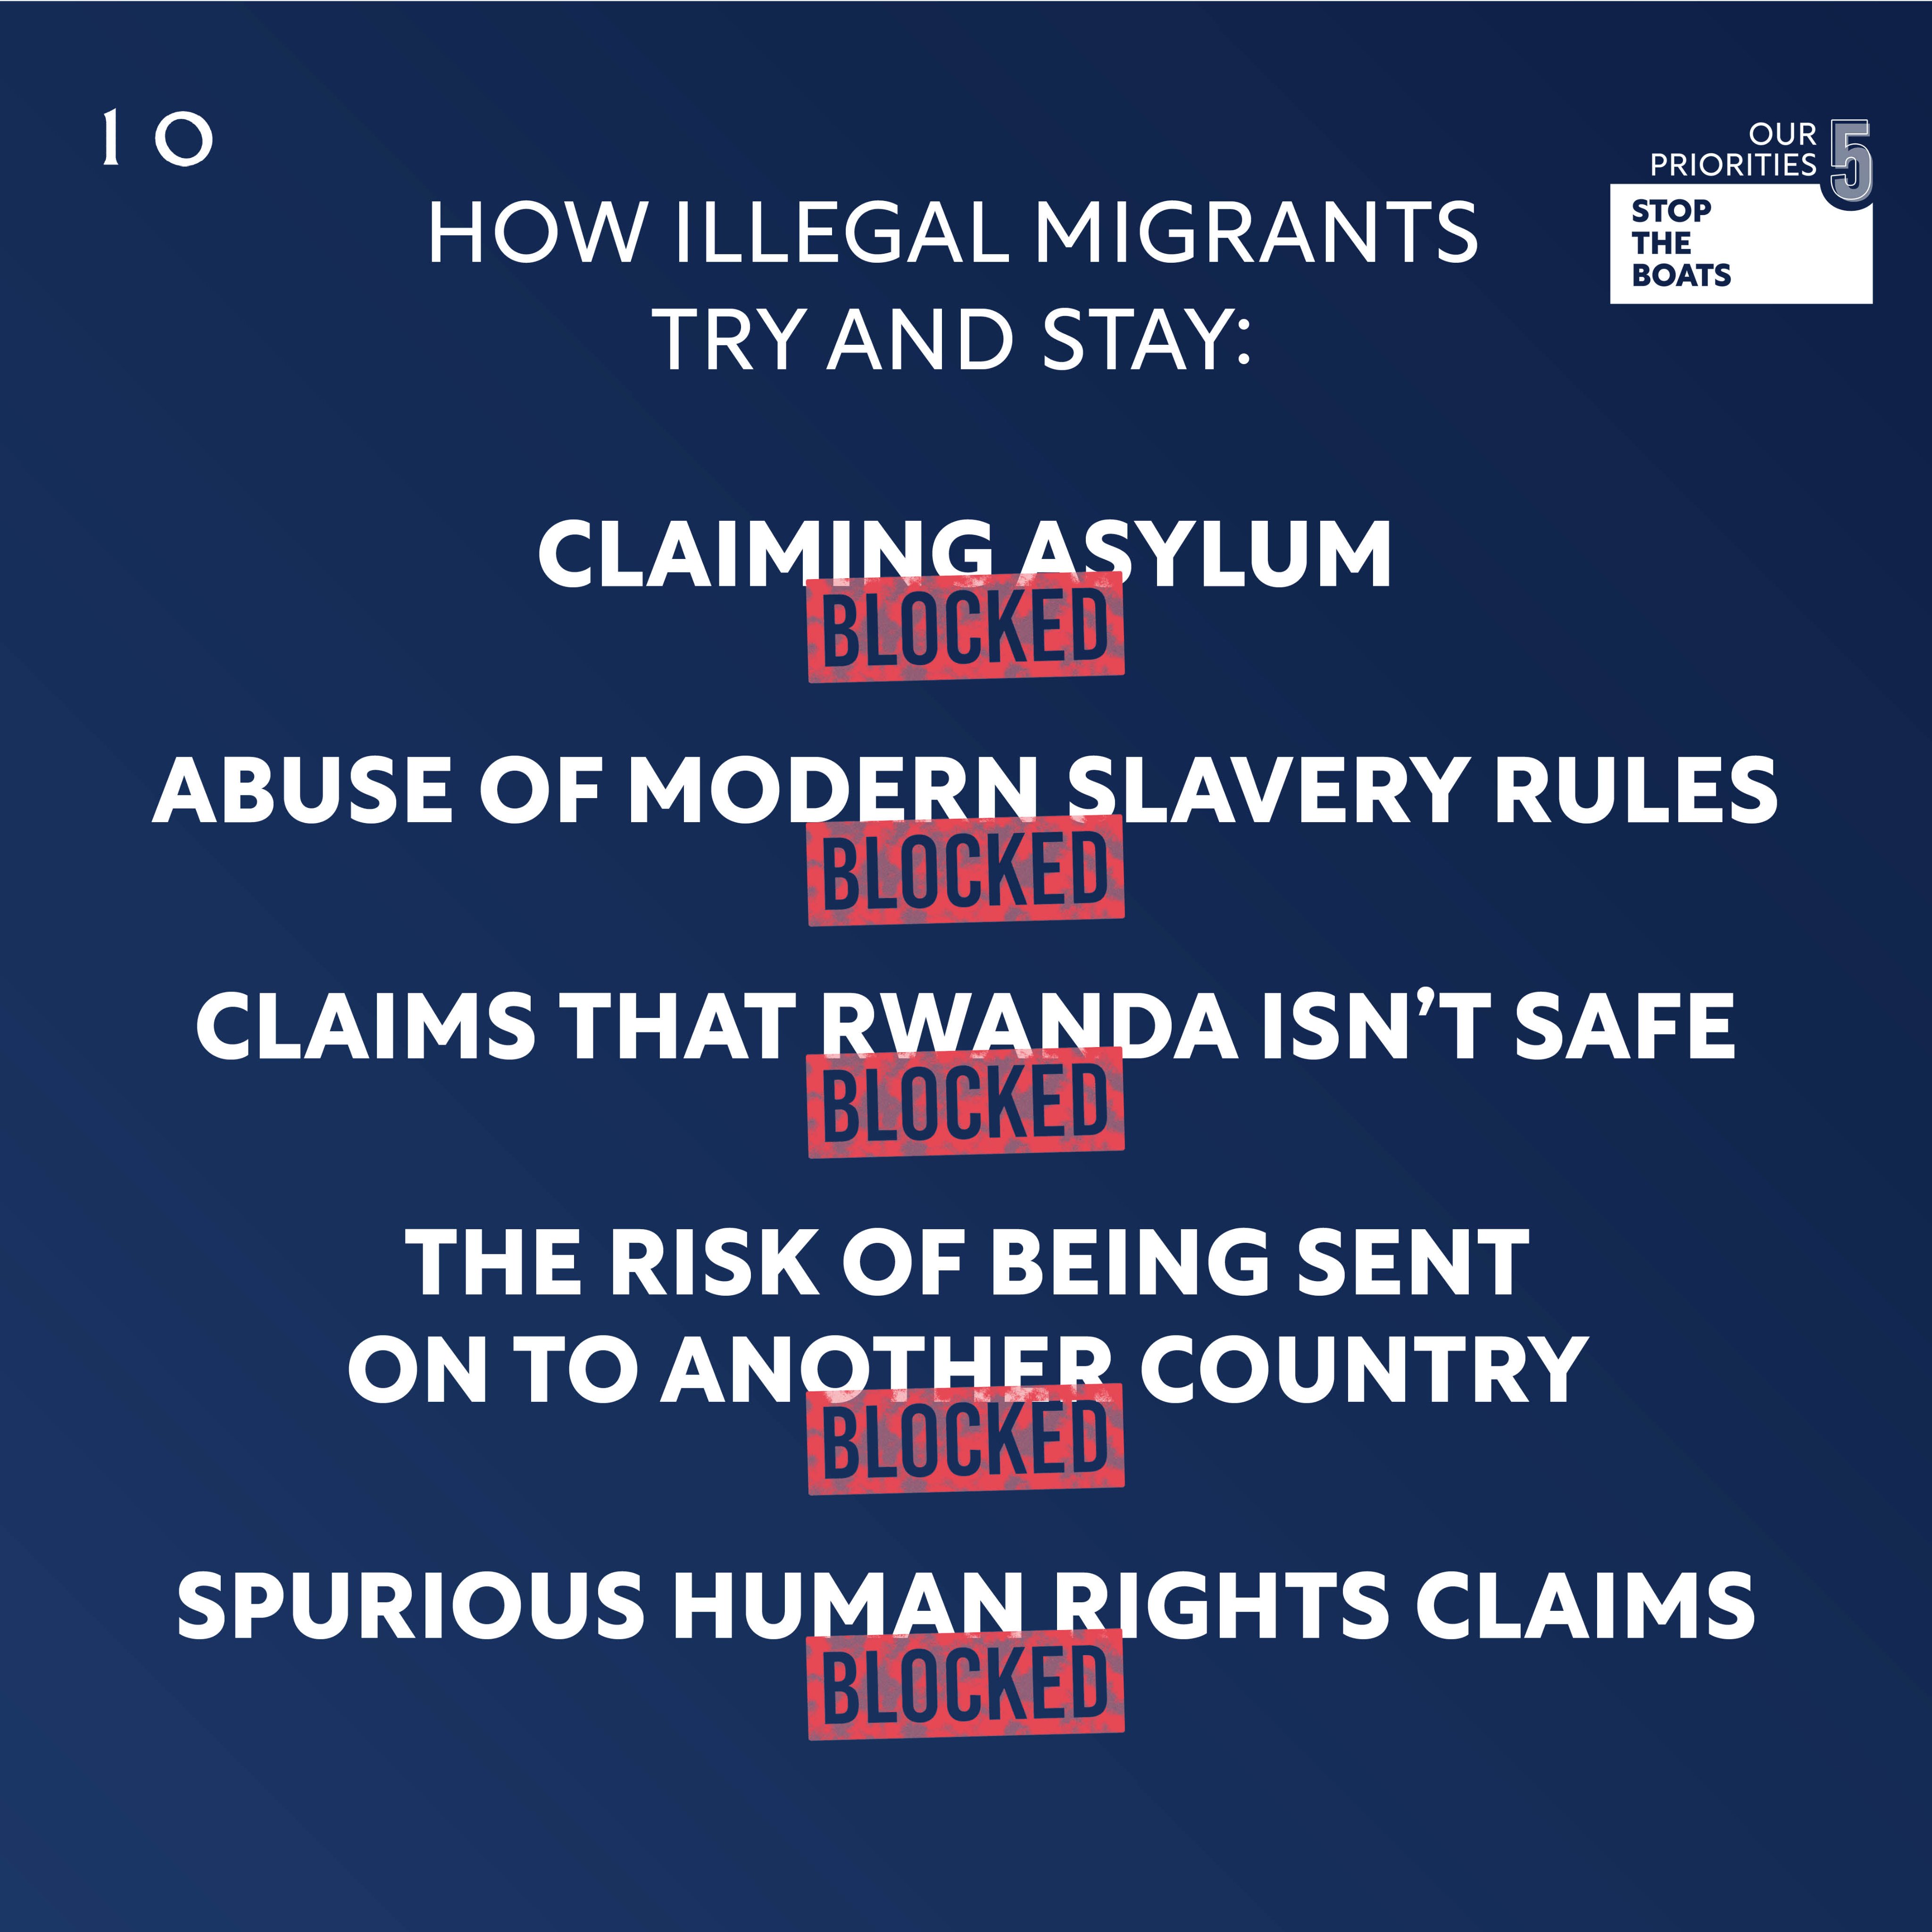 How illegal migrants try and stay:

- Claiming asylum - blocked.
- Abuse of modern slavery rules - blocked.
- Claims that Rwanda isn't safe - blocked.
- The risk of being sent to another country - blocked.
- Spurious human rights claims - blocked.